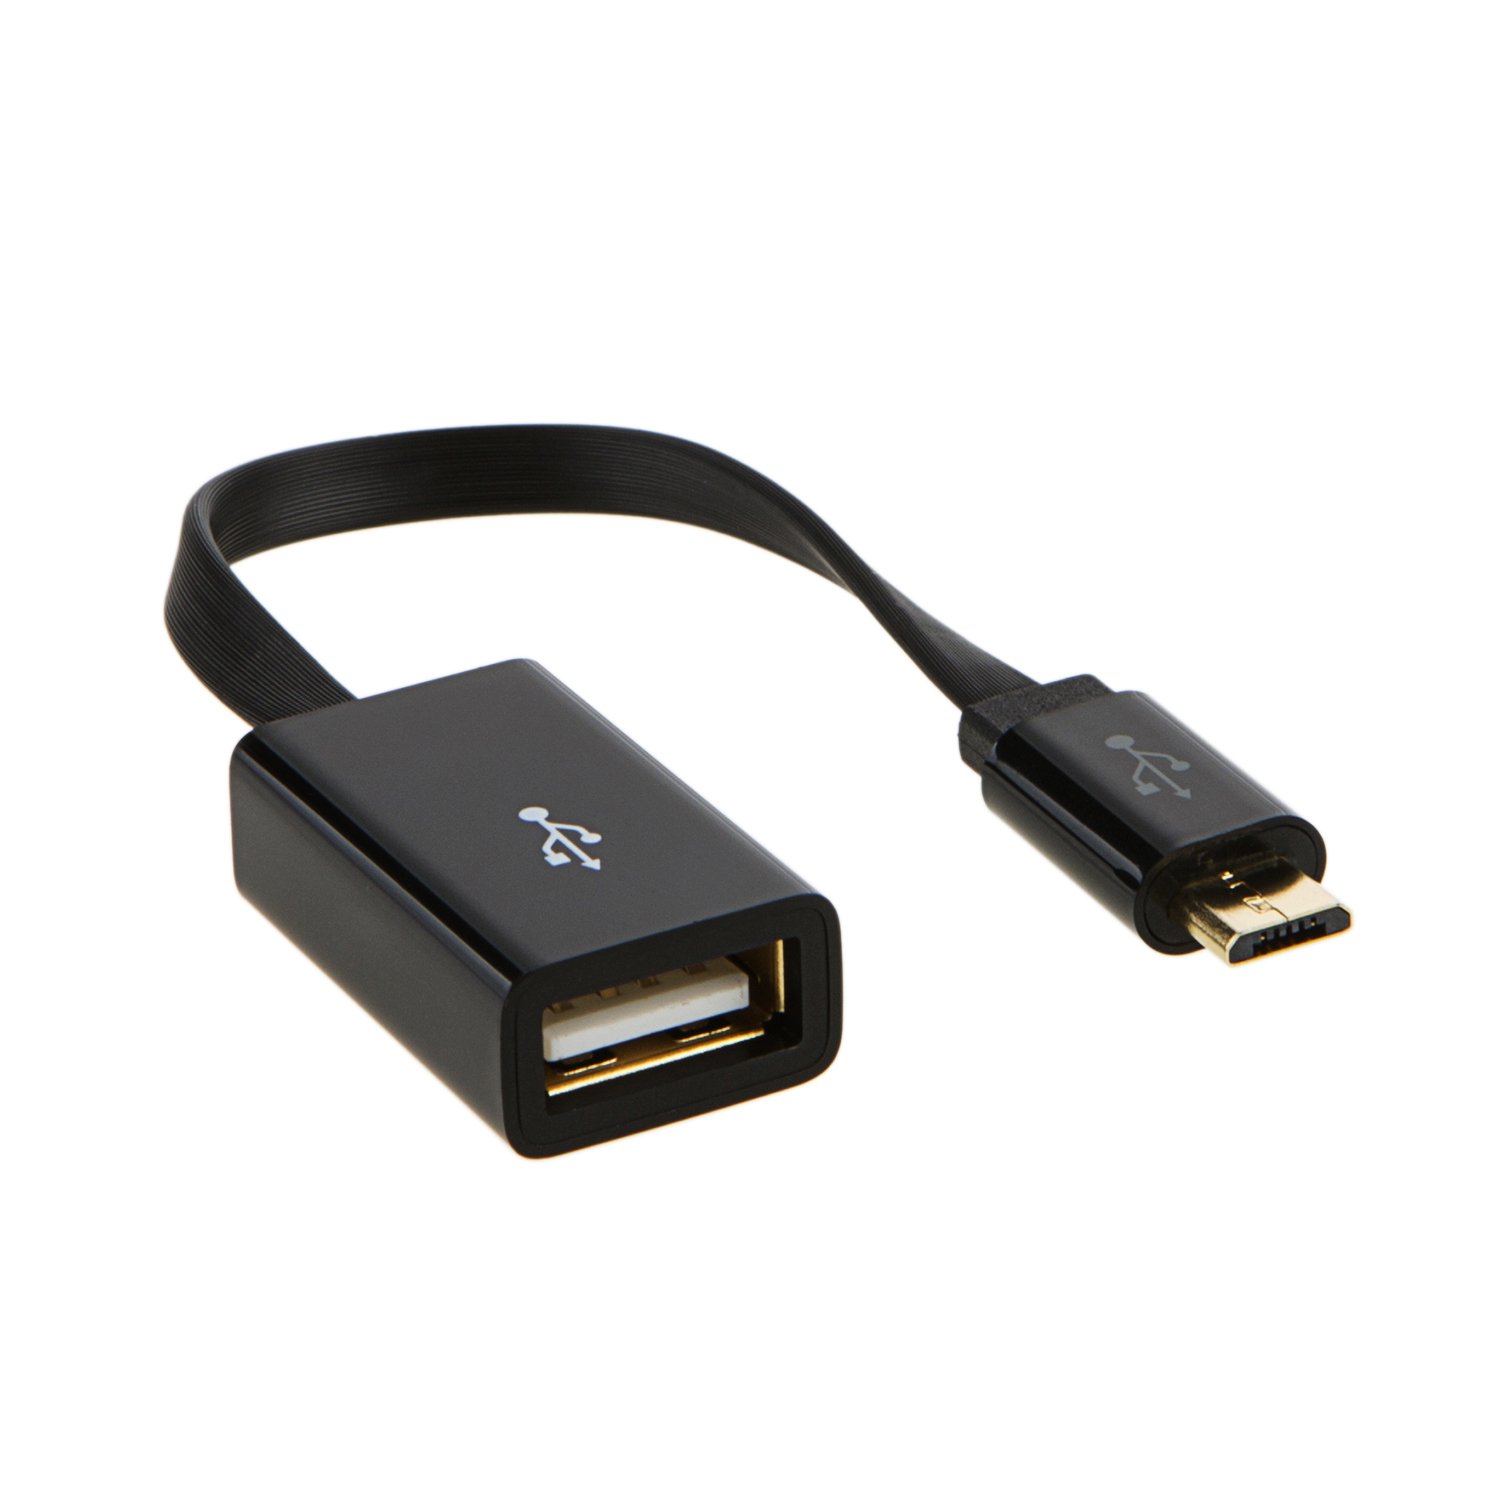 Micro USB 2.0 OTG Cable USB Male to Female for Android and Other Smart Tablets with OTG Function | Nairobi Computer Shop